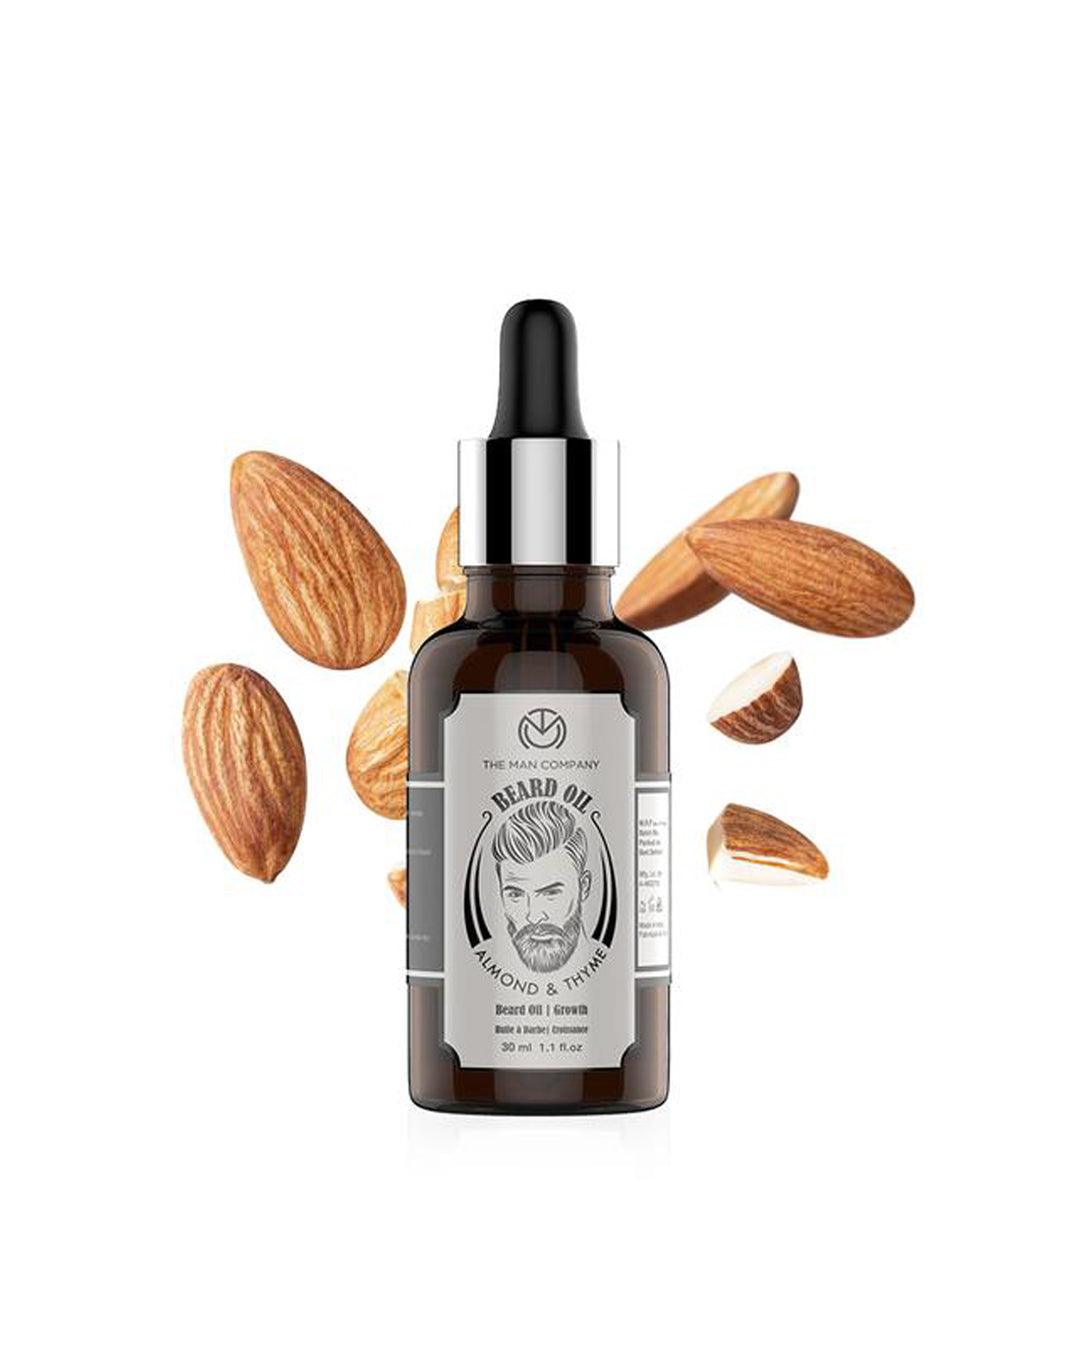 The Man Company - Beard Oil Almond And Thyme (Pack Of 2, Each 30 mL) - MARKET 99